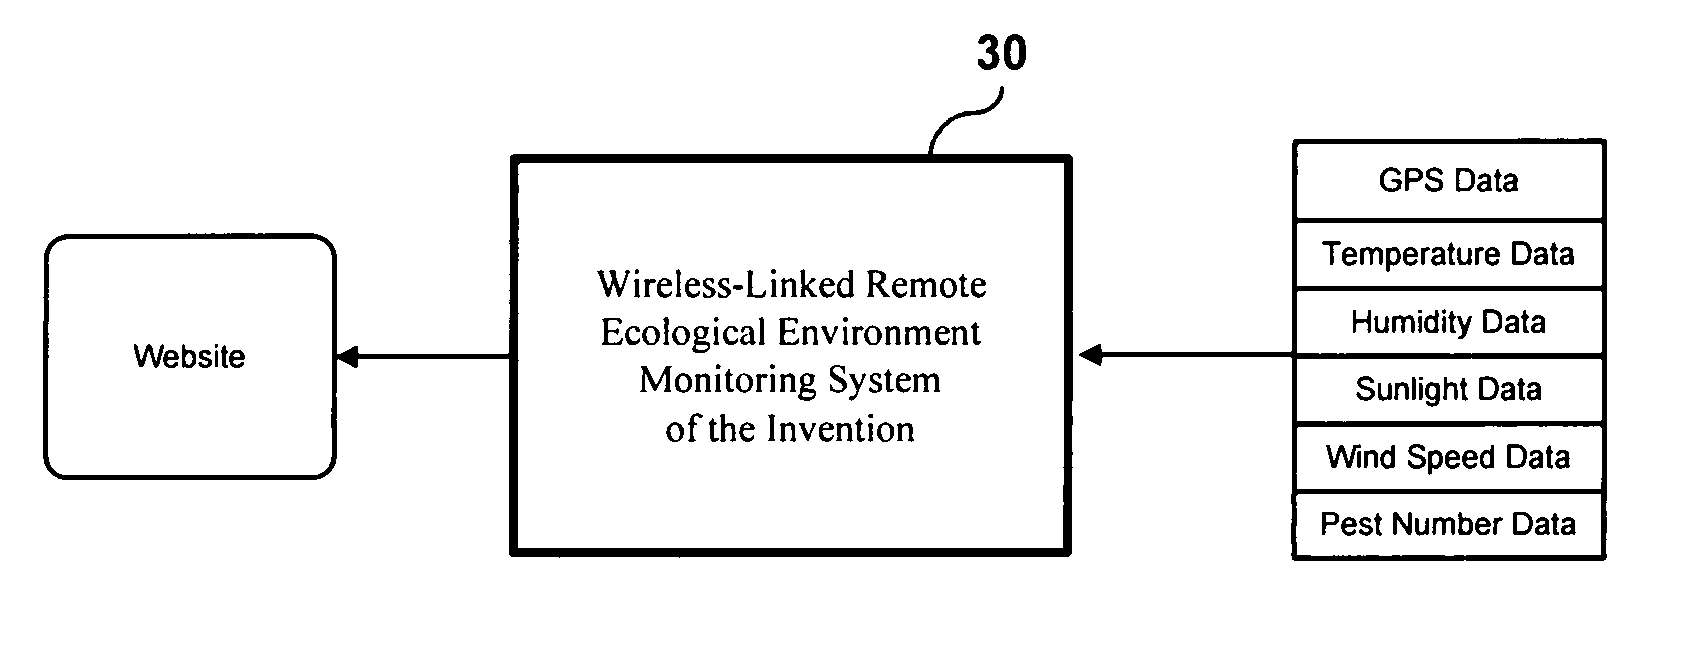 Wireless-linked remote ecological environment monitoring system